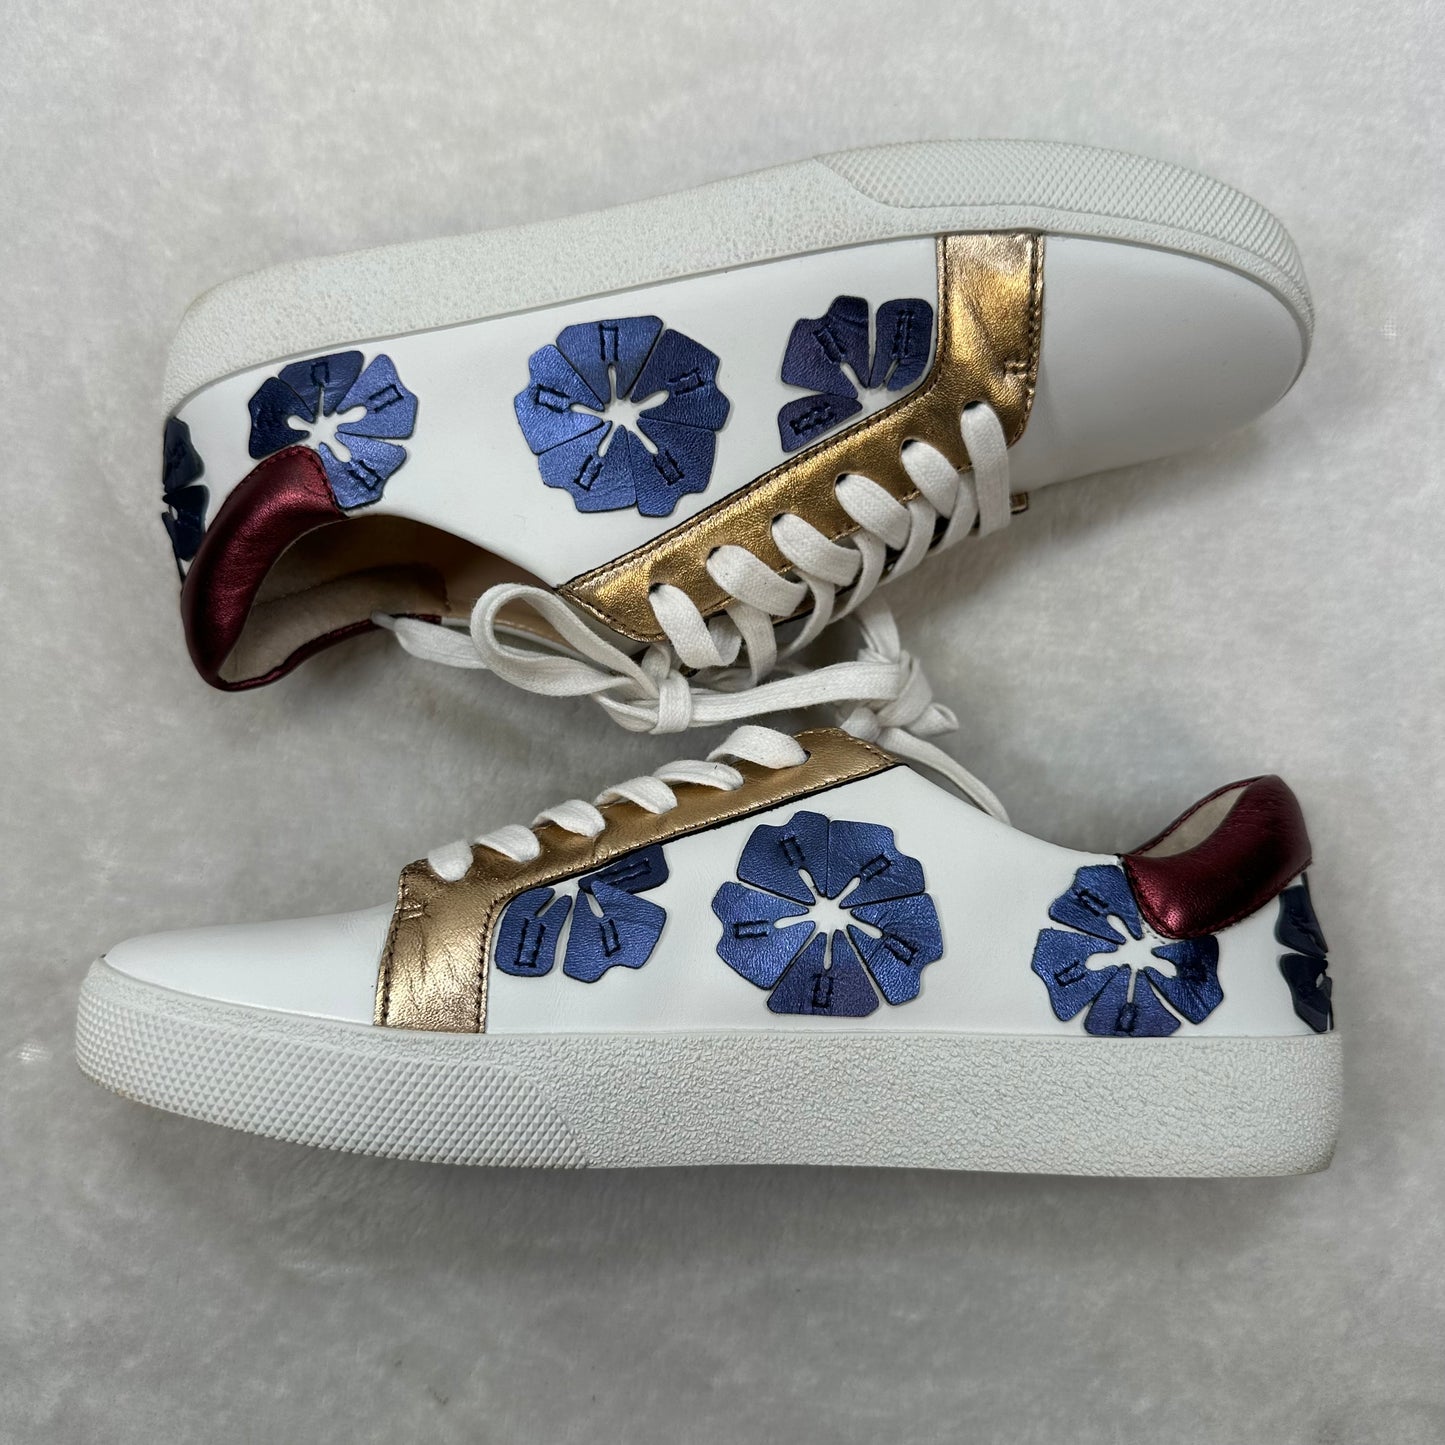 Shoes Sneakers By Vince Camuto  Size: 8